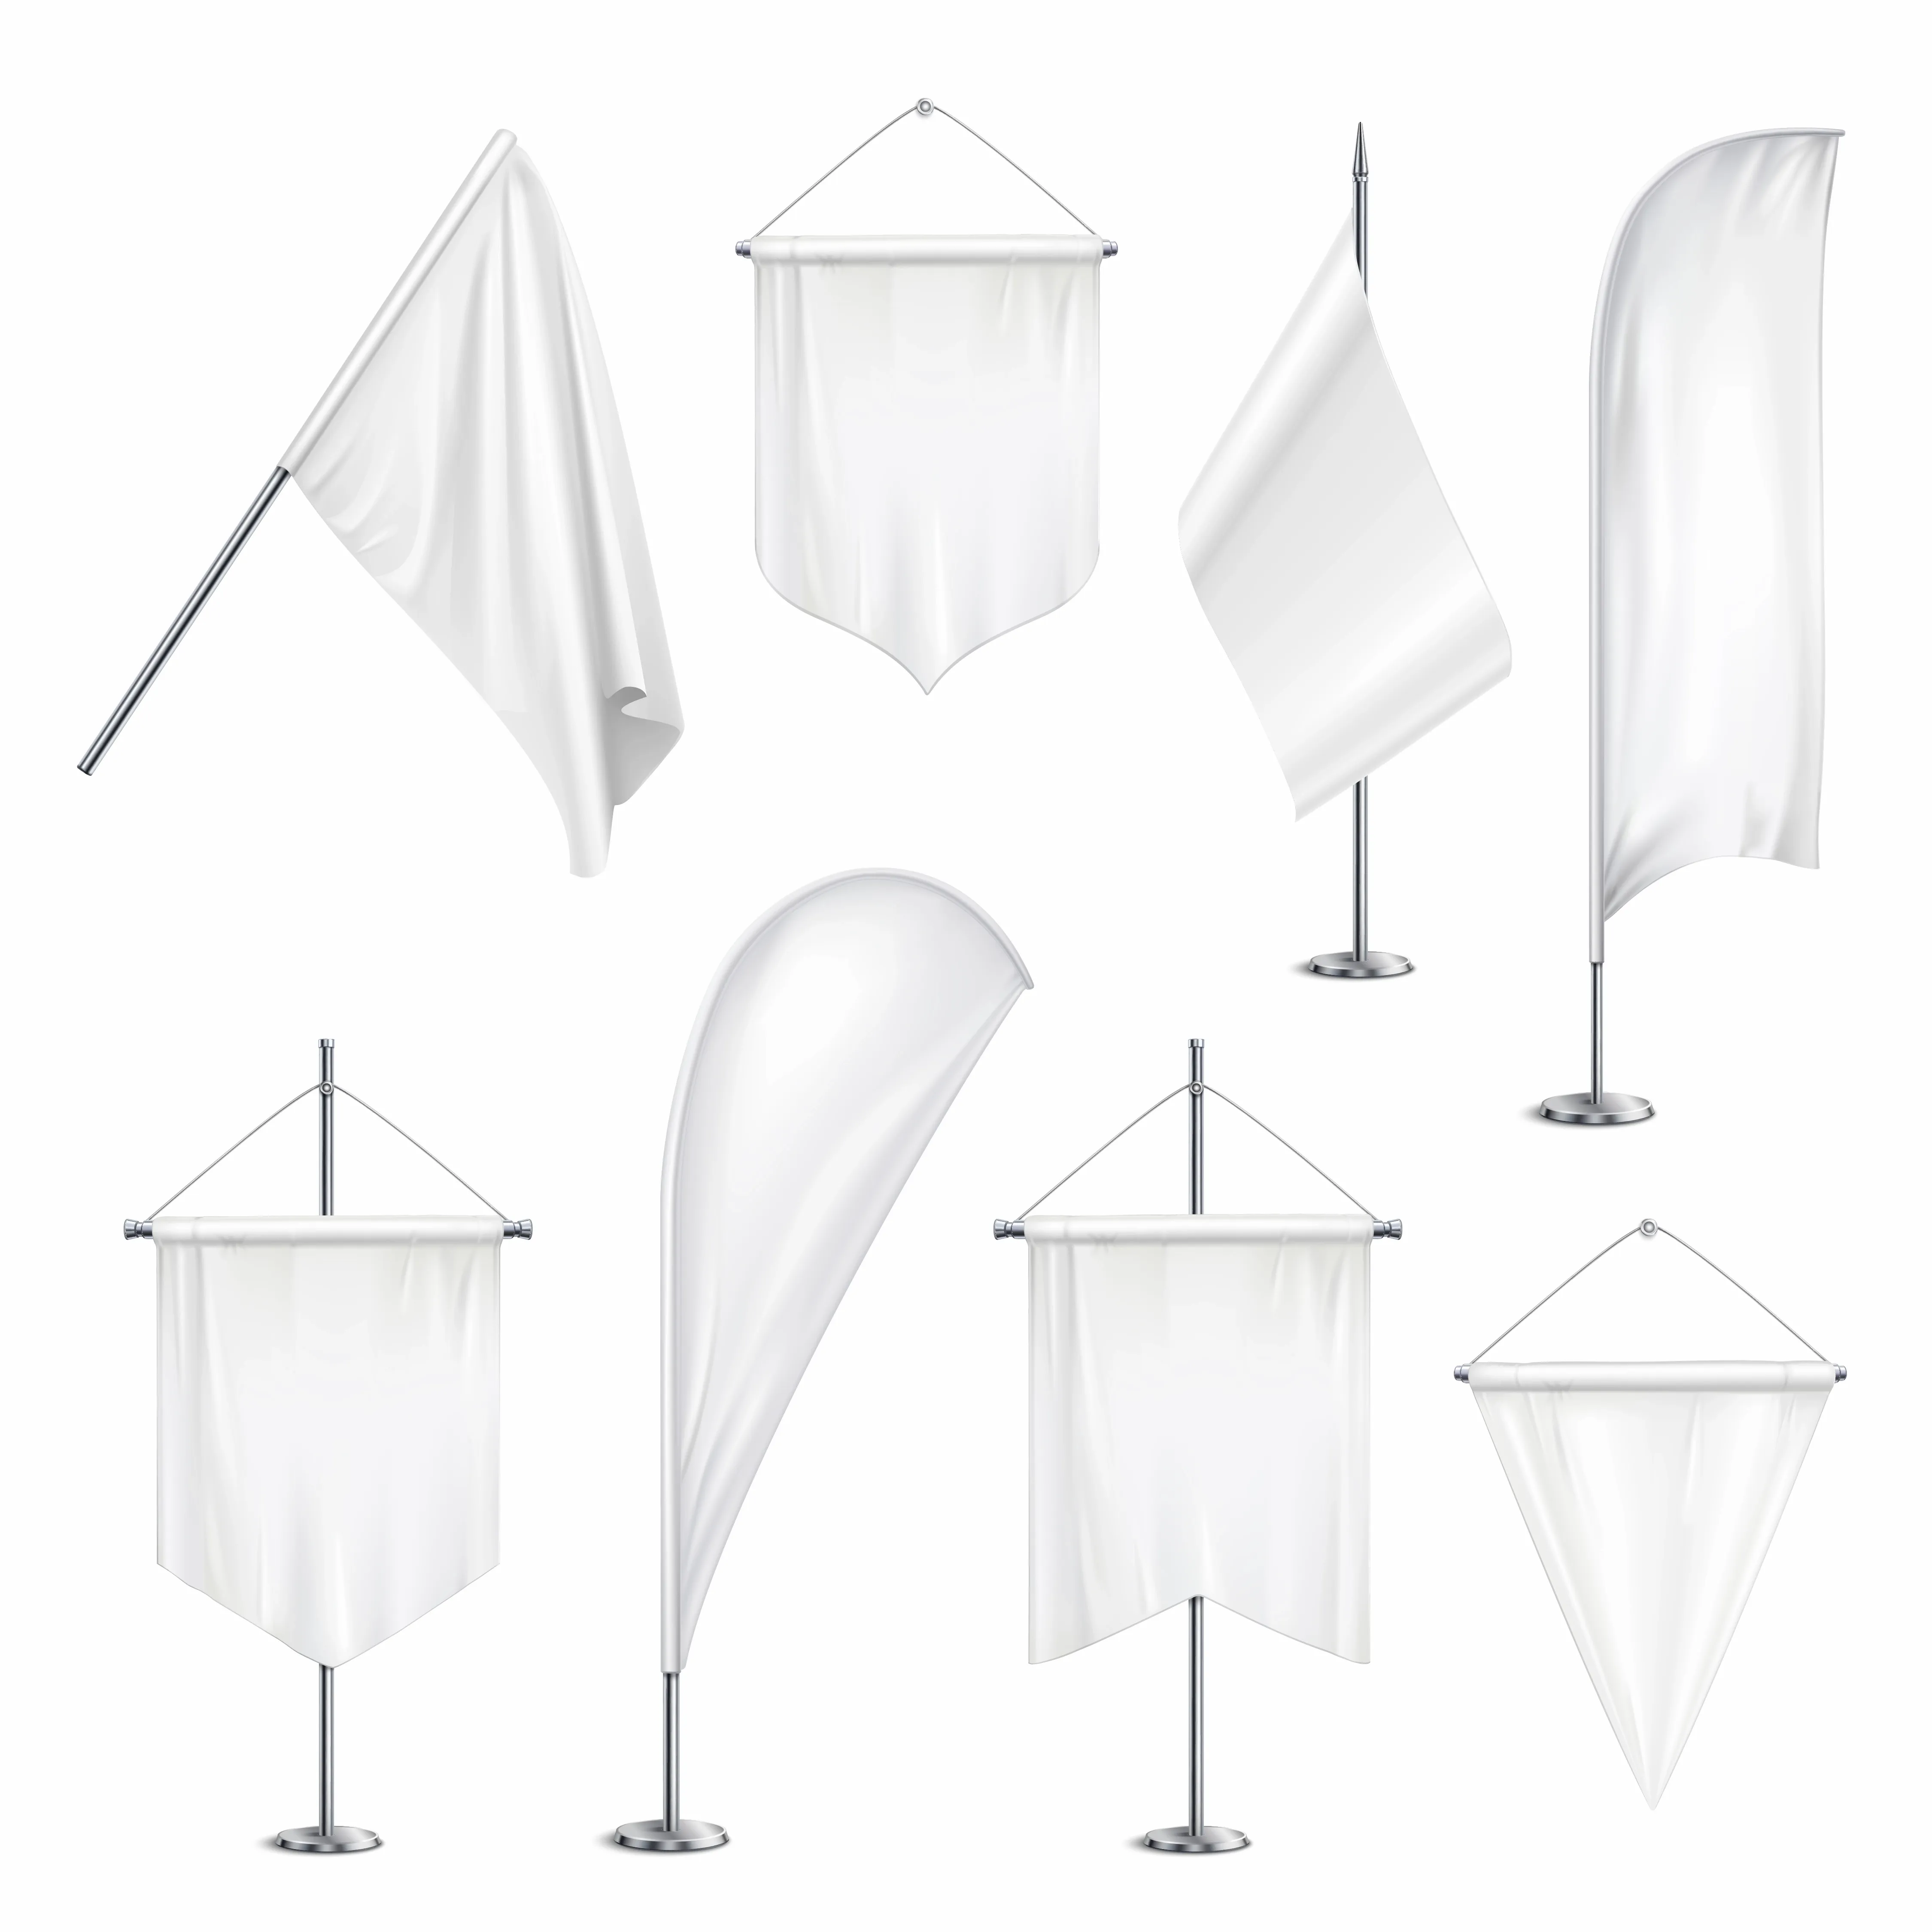 Various sizes shapes pennants banners flags white blank hanging and on pole stands realistic set illustration